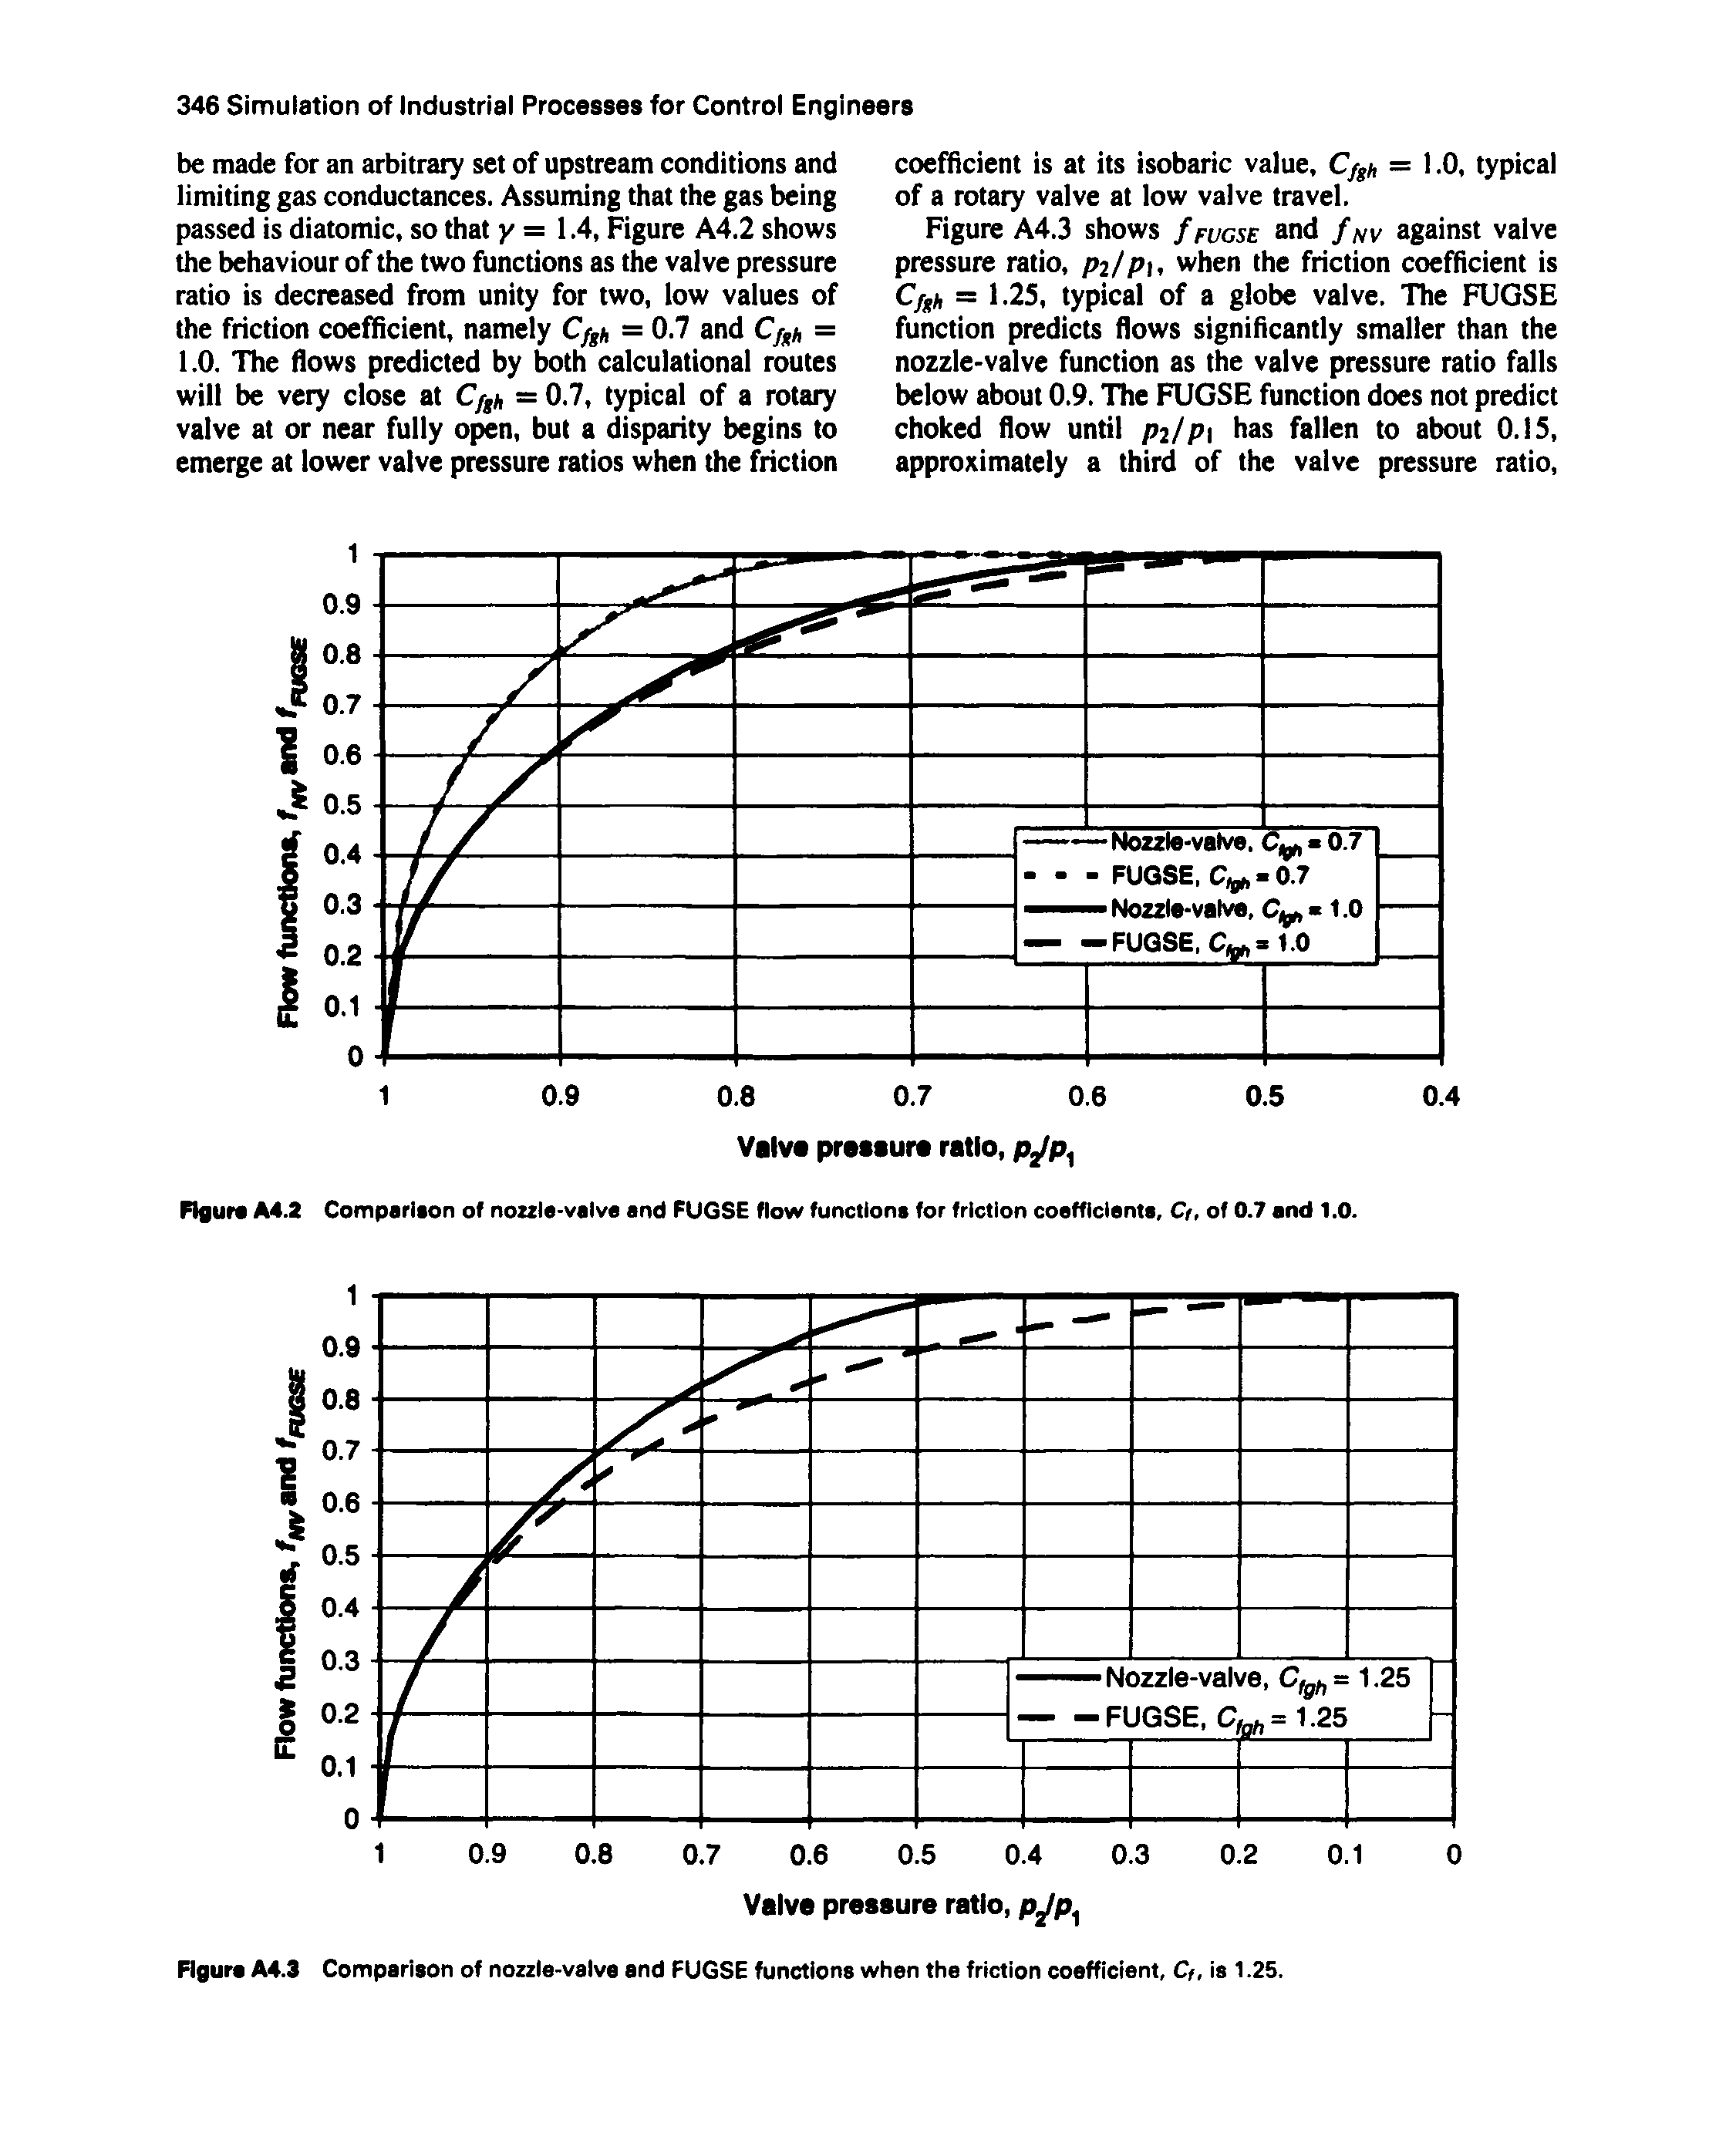 Figure A4.3 shows /fugse and /nv against valve pressure ratio, pi p, when the friction coefficient is Cfgh = 1.25, typical of a globe valve. The FUGSE function predicts flows significantly smaller than the nozzle-valve function as the valve pressure ratio falls below about 0.9. The FUGSE function does not predict choked flow until Pi p has fallen to about O.IS, approximately a third of the valve pressure ratio.